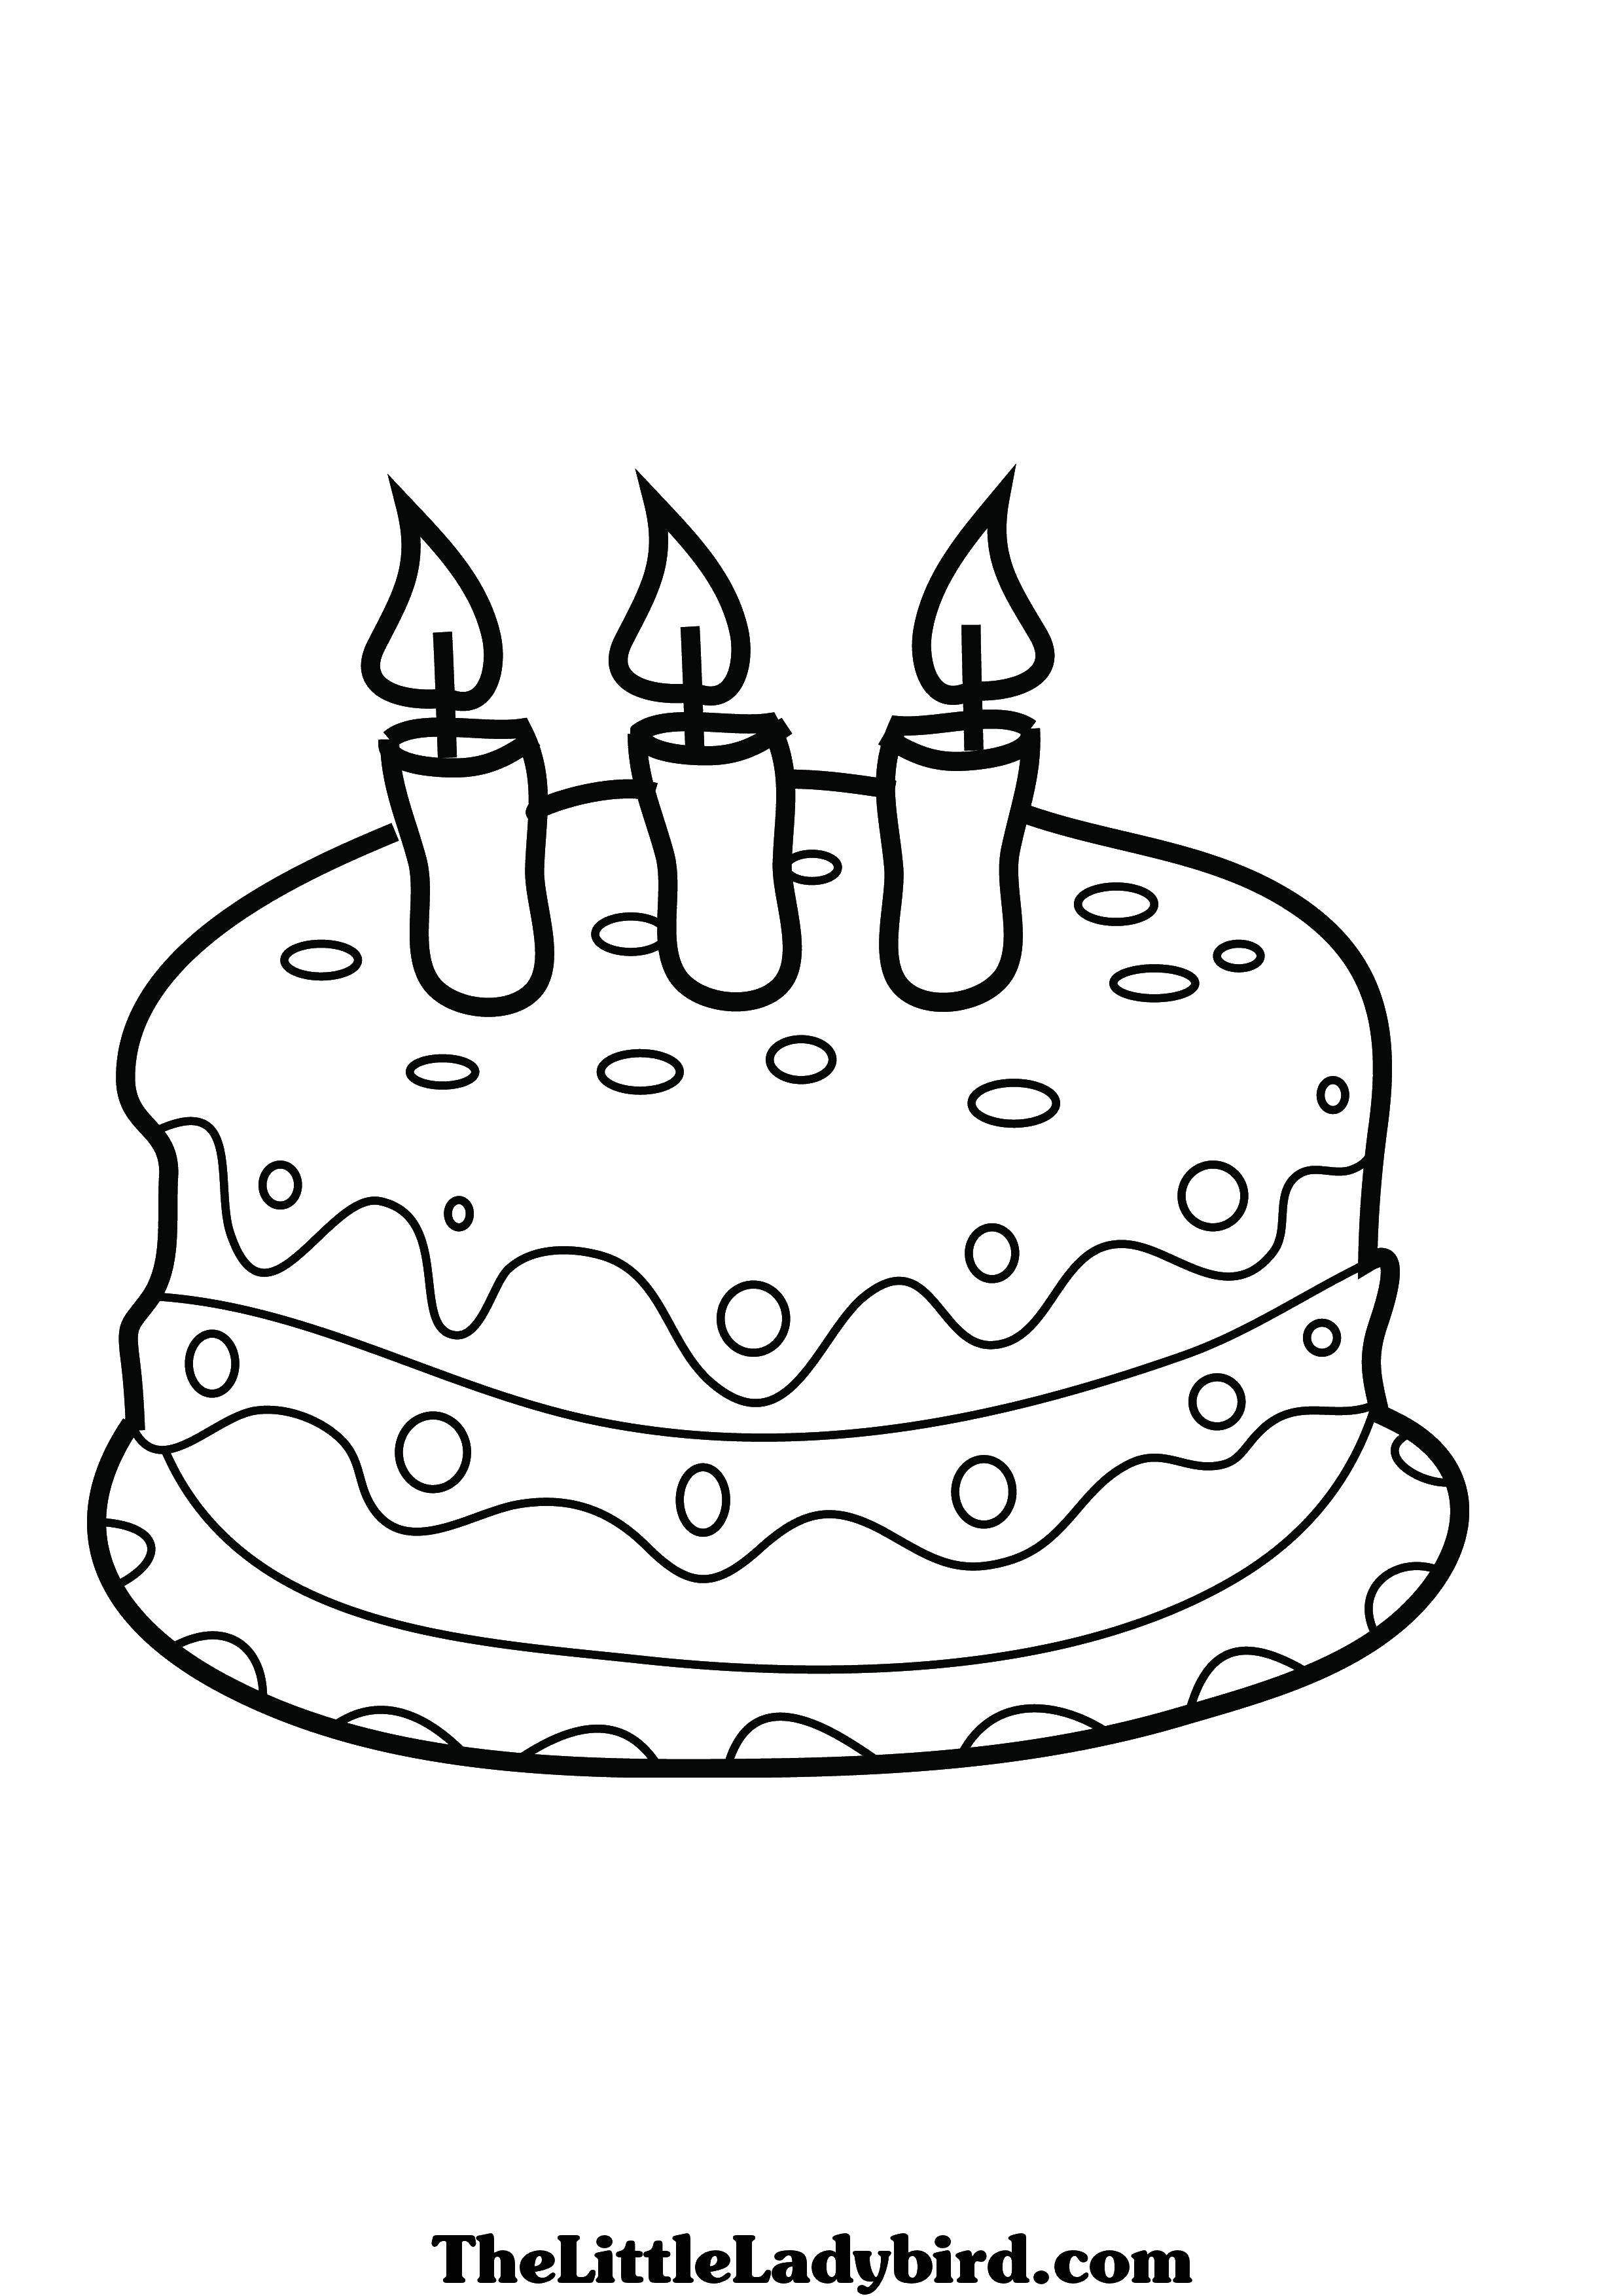 Coloring Cake and three candles. Category cakes. Tags:  cake, candle, cream.